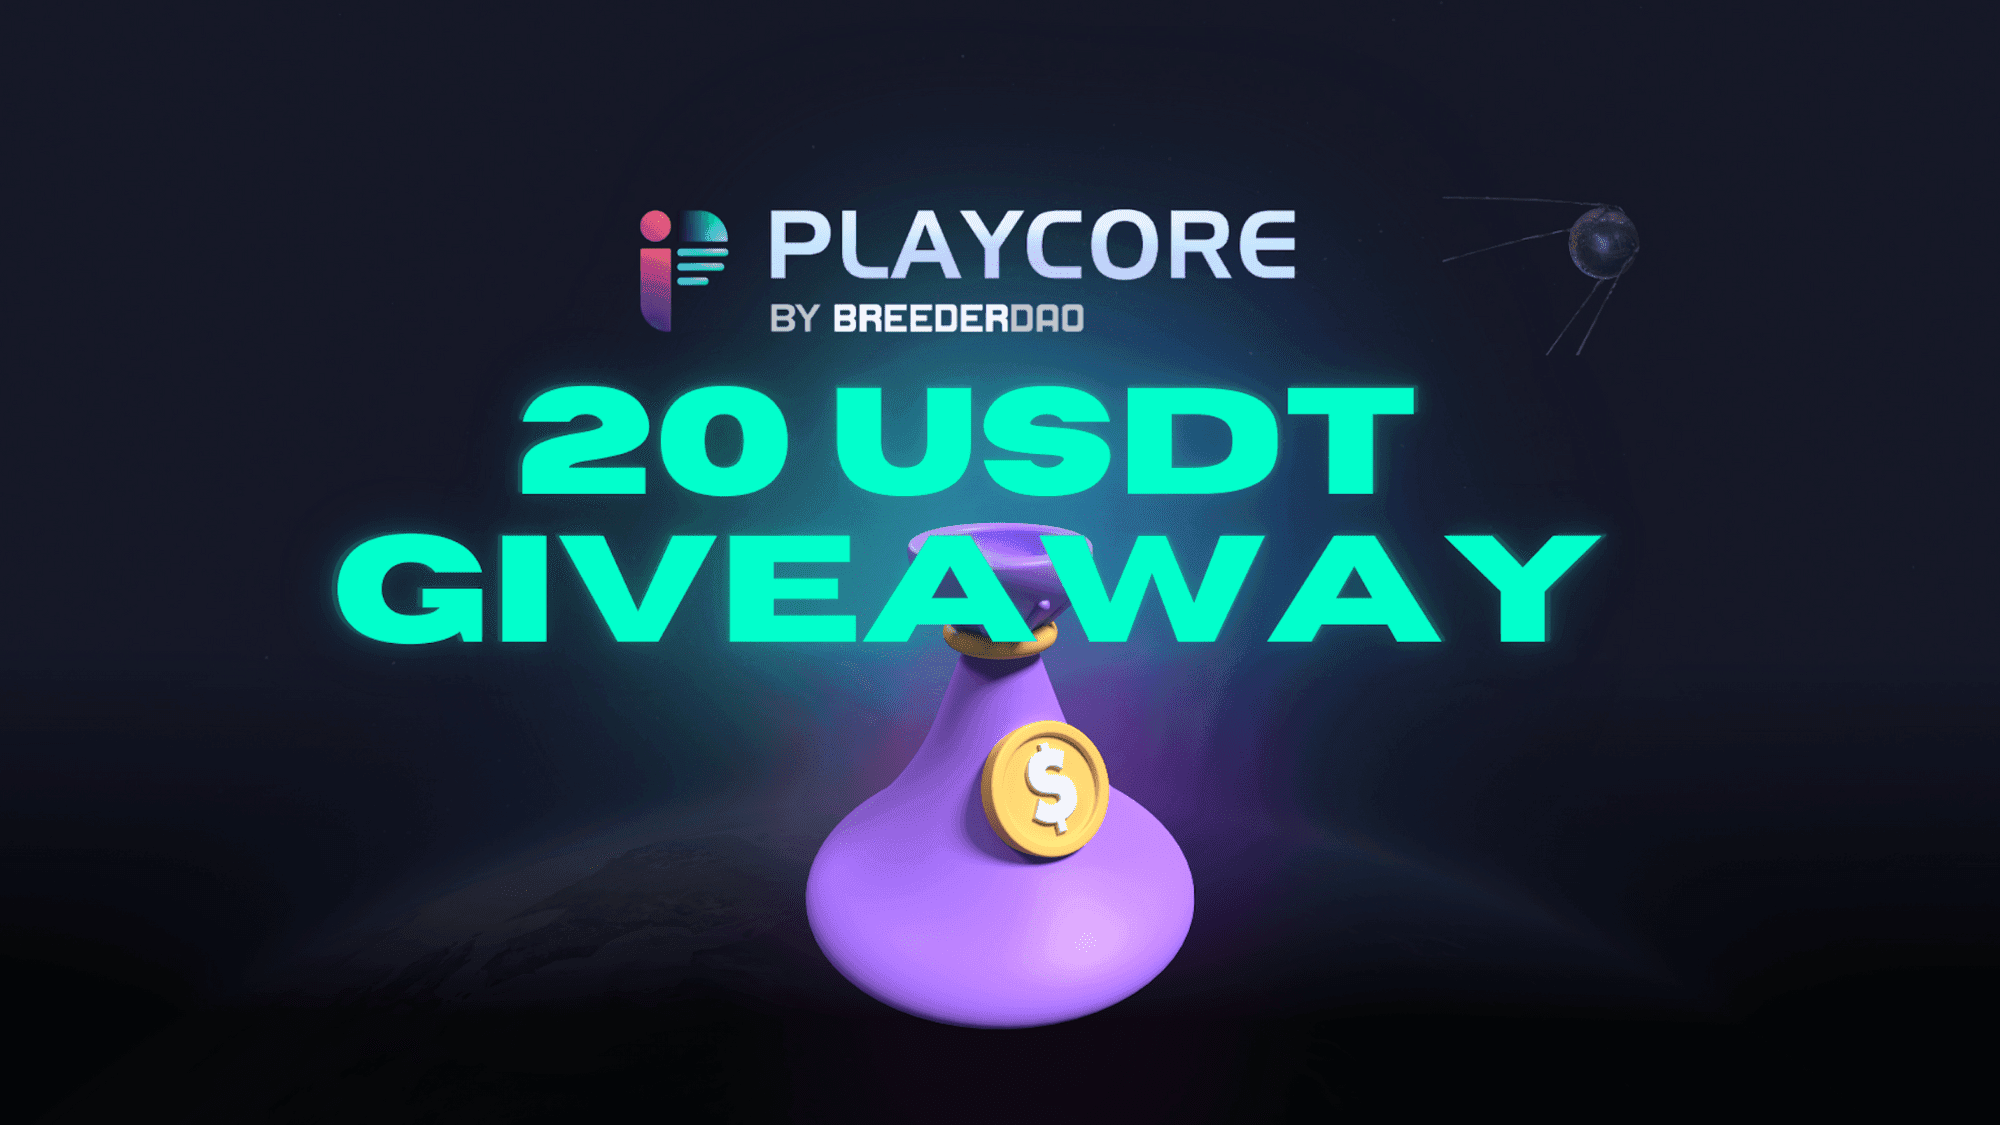 Sign up to Playcore and Win 20 USDT 💰